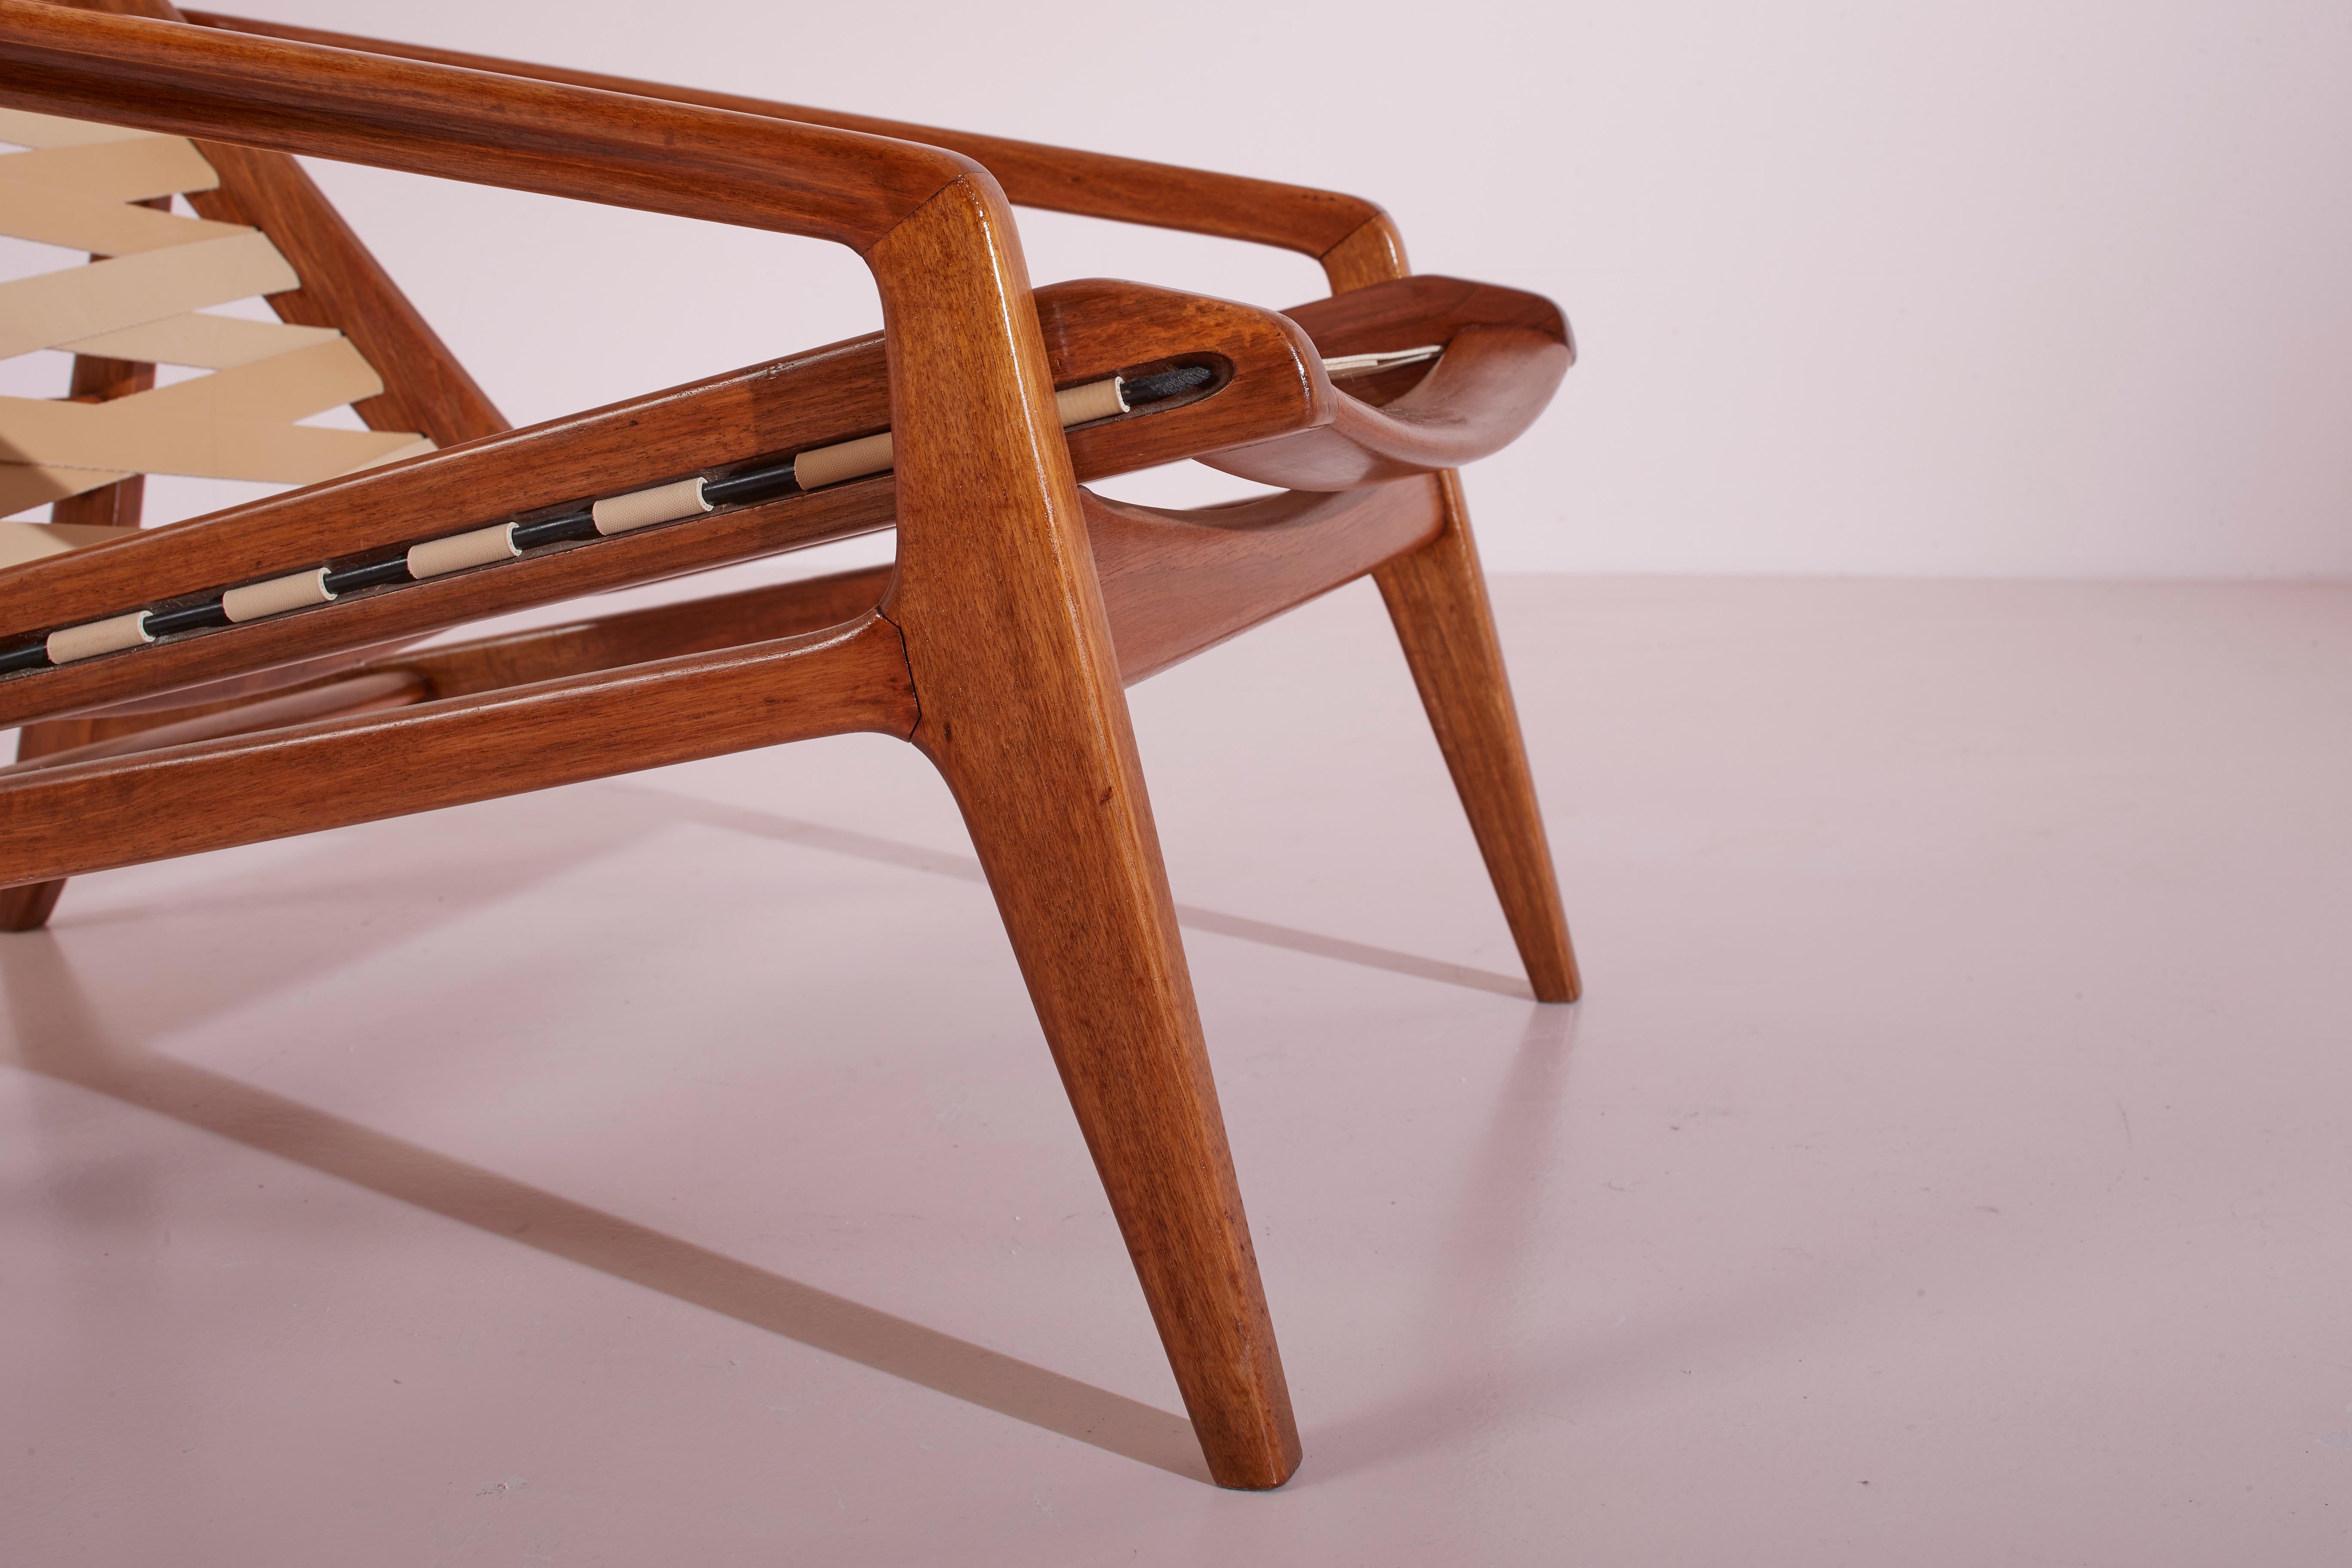 Mid-20th Century Gio Ponti Model 811 armchair made of walnut and rubber, Cassina, Italy, 1957 For Sale